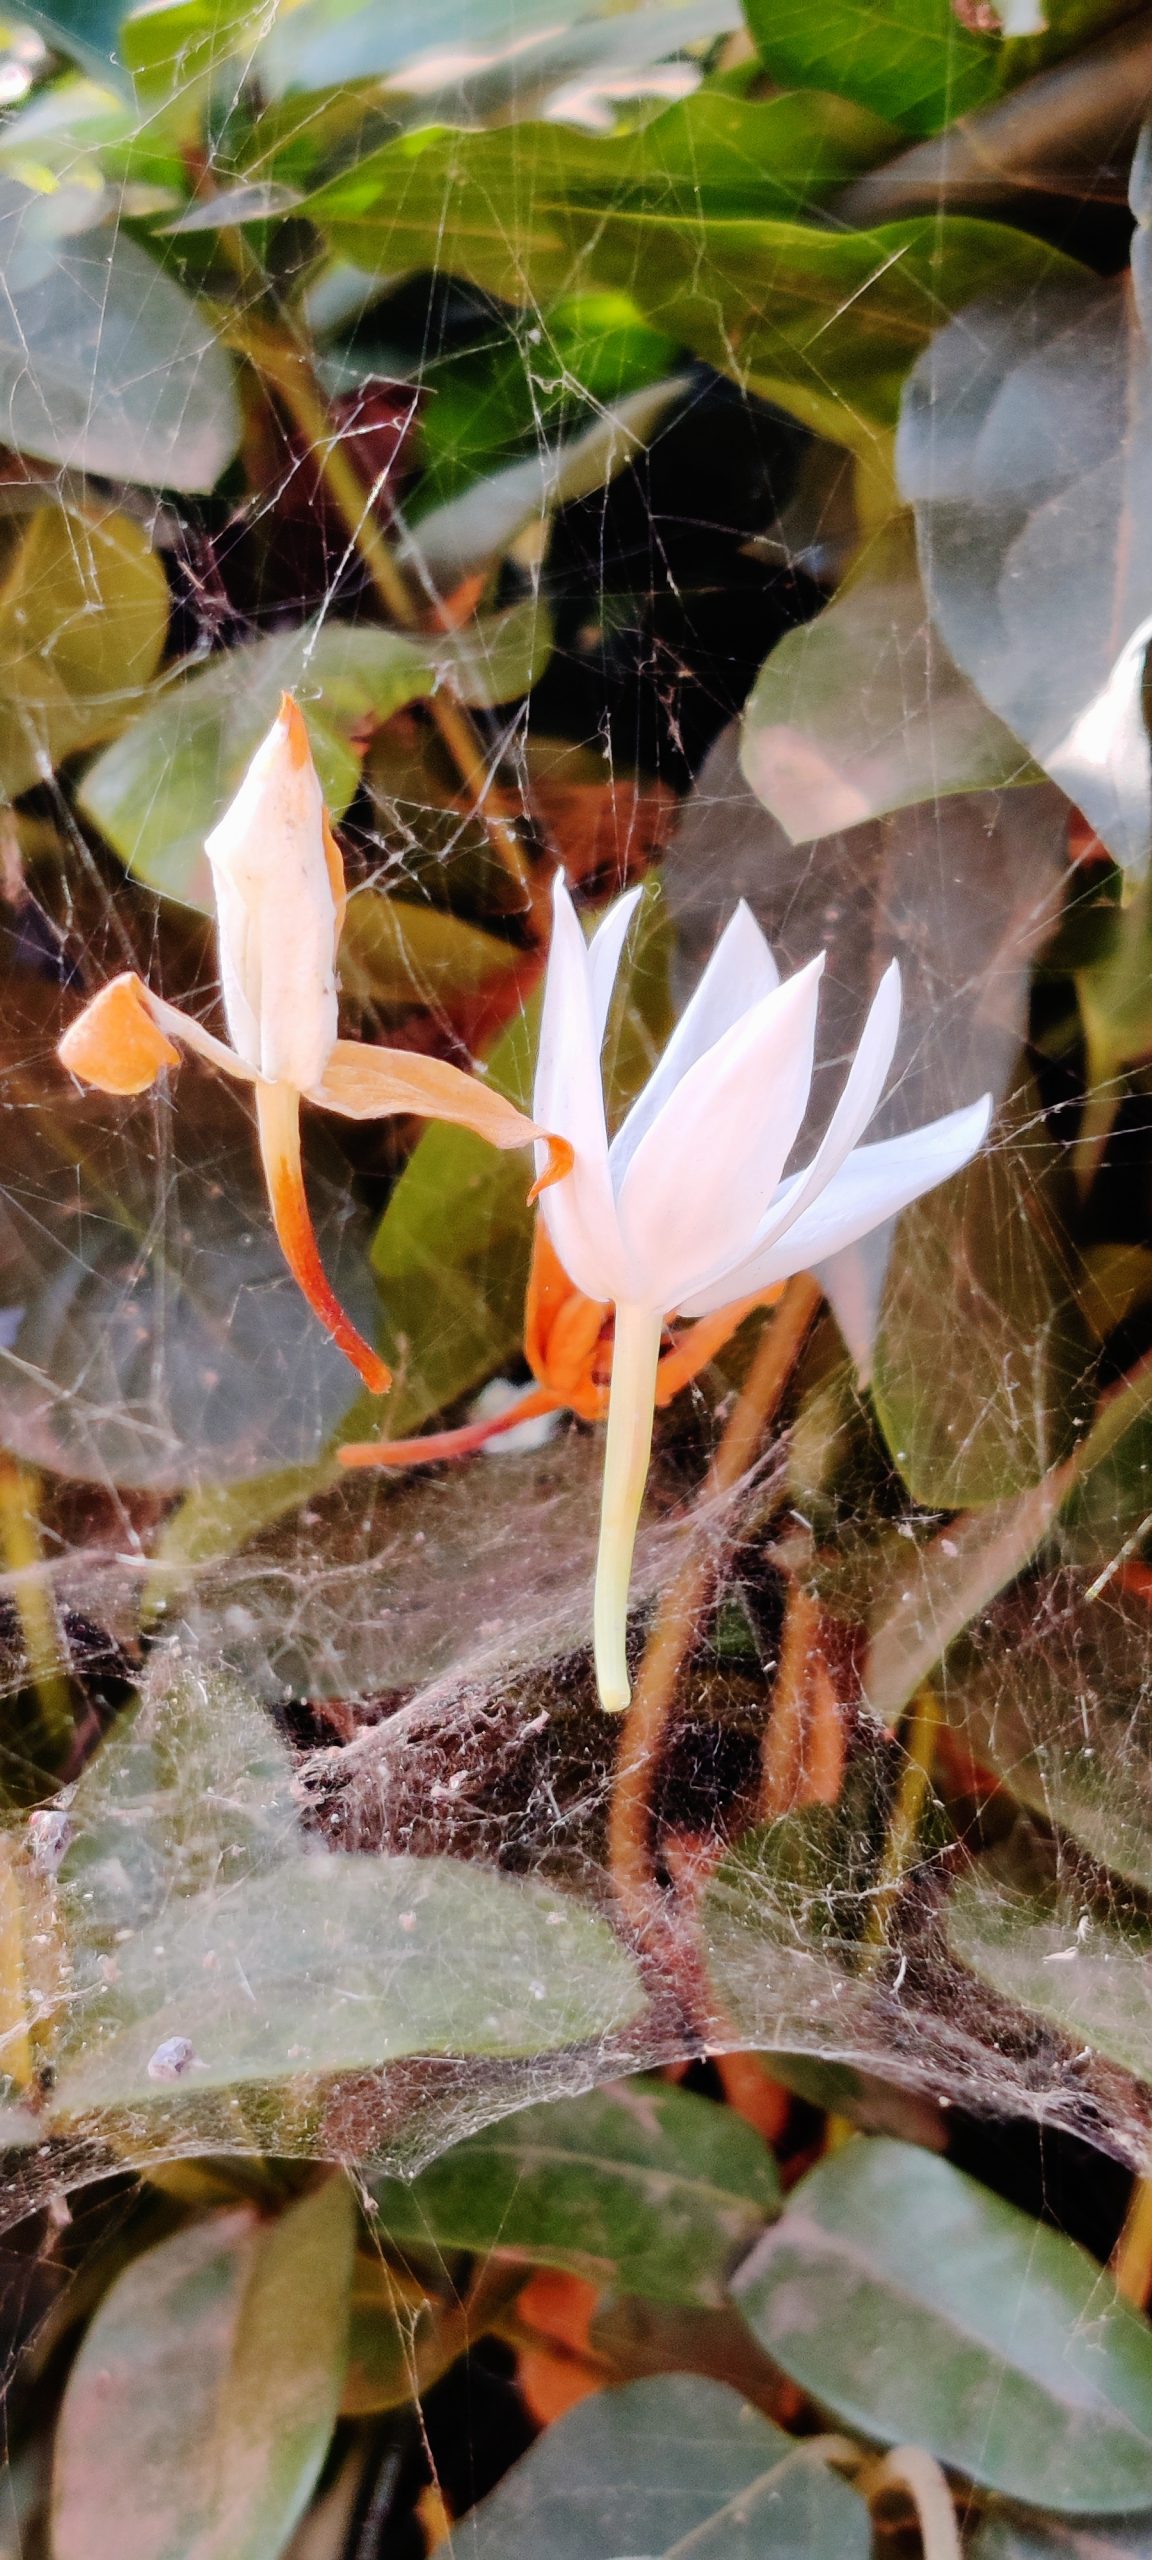 Spider web strangled with flowers